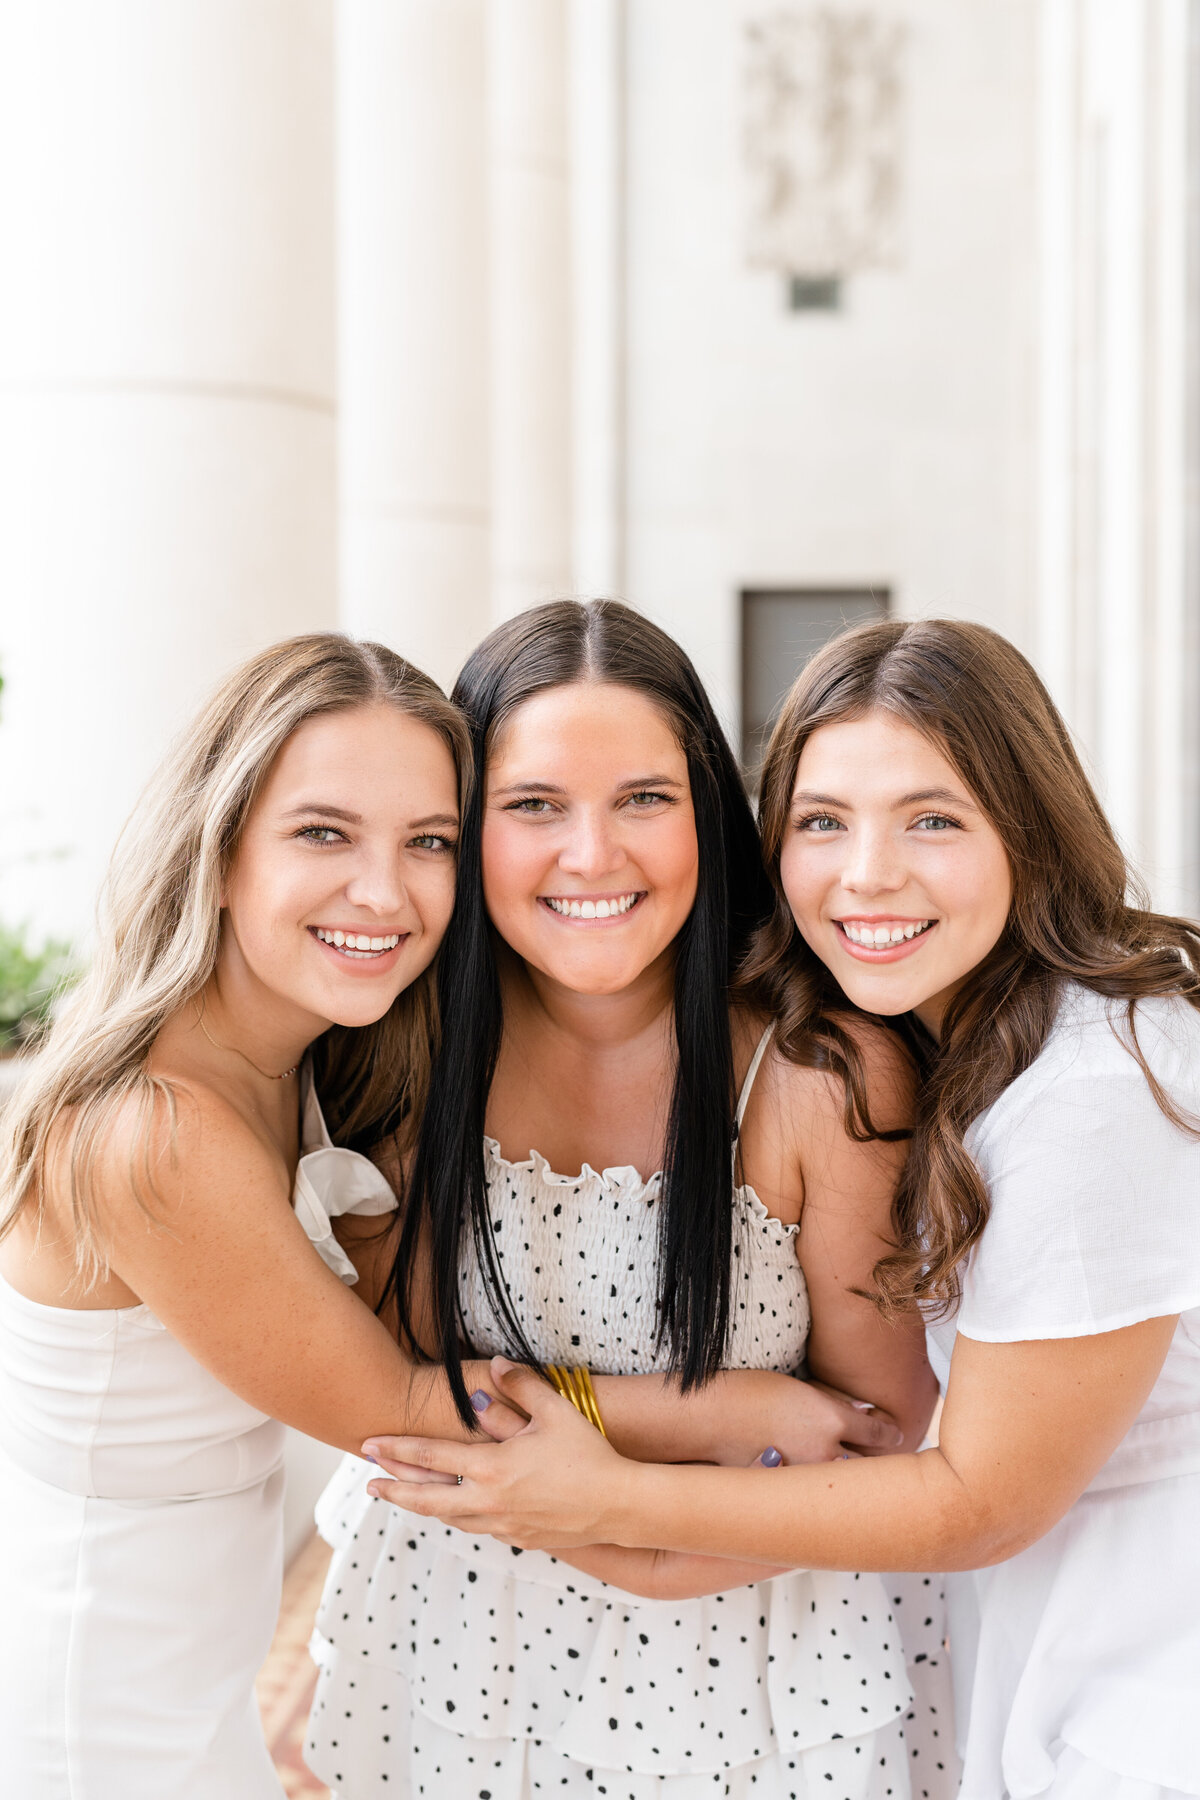 Texas A&M senior girls hugging each other and smiling while wearing white dresses in the columns of the Administration Building